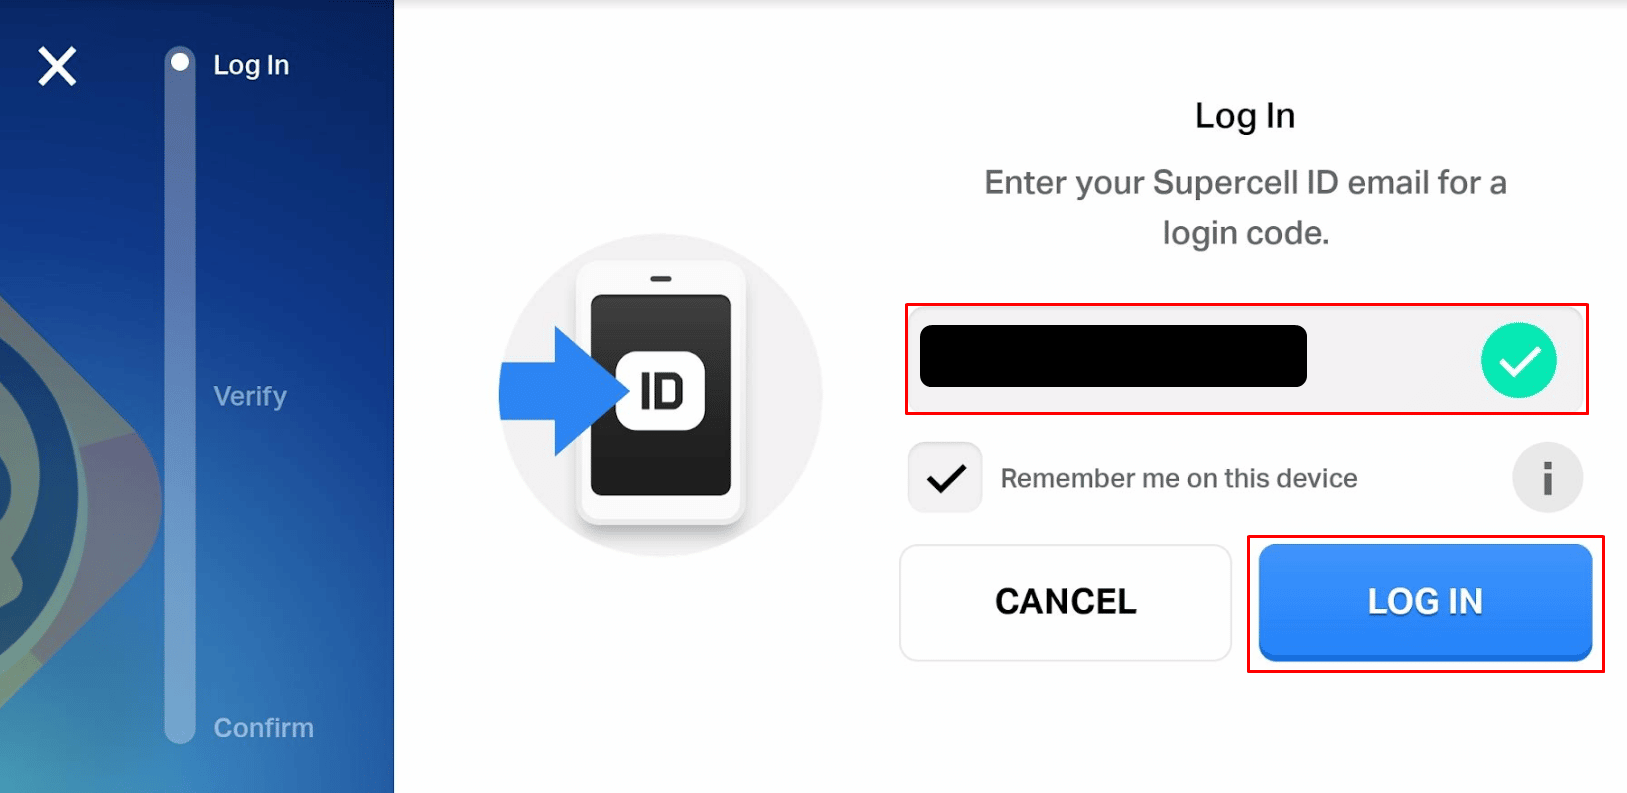 Enter the login credentials of your Supercell ID linked to your previous account and tap on LOG IN